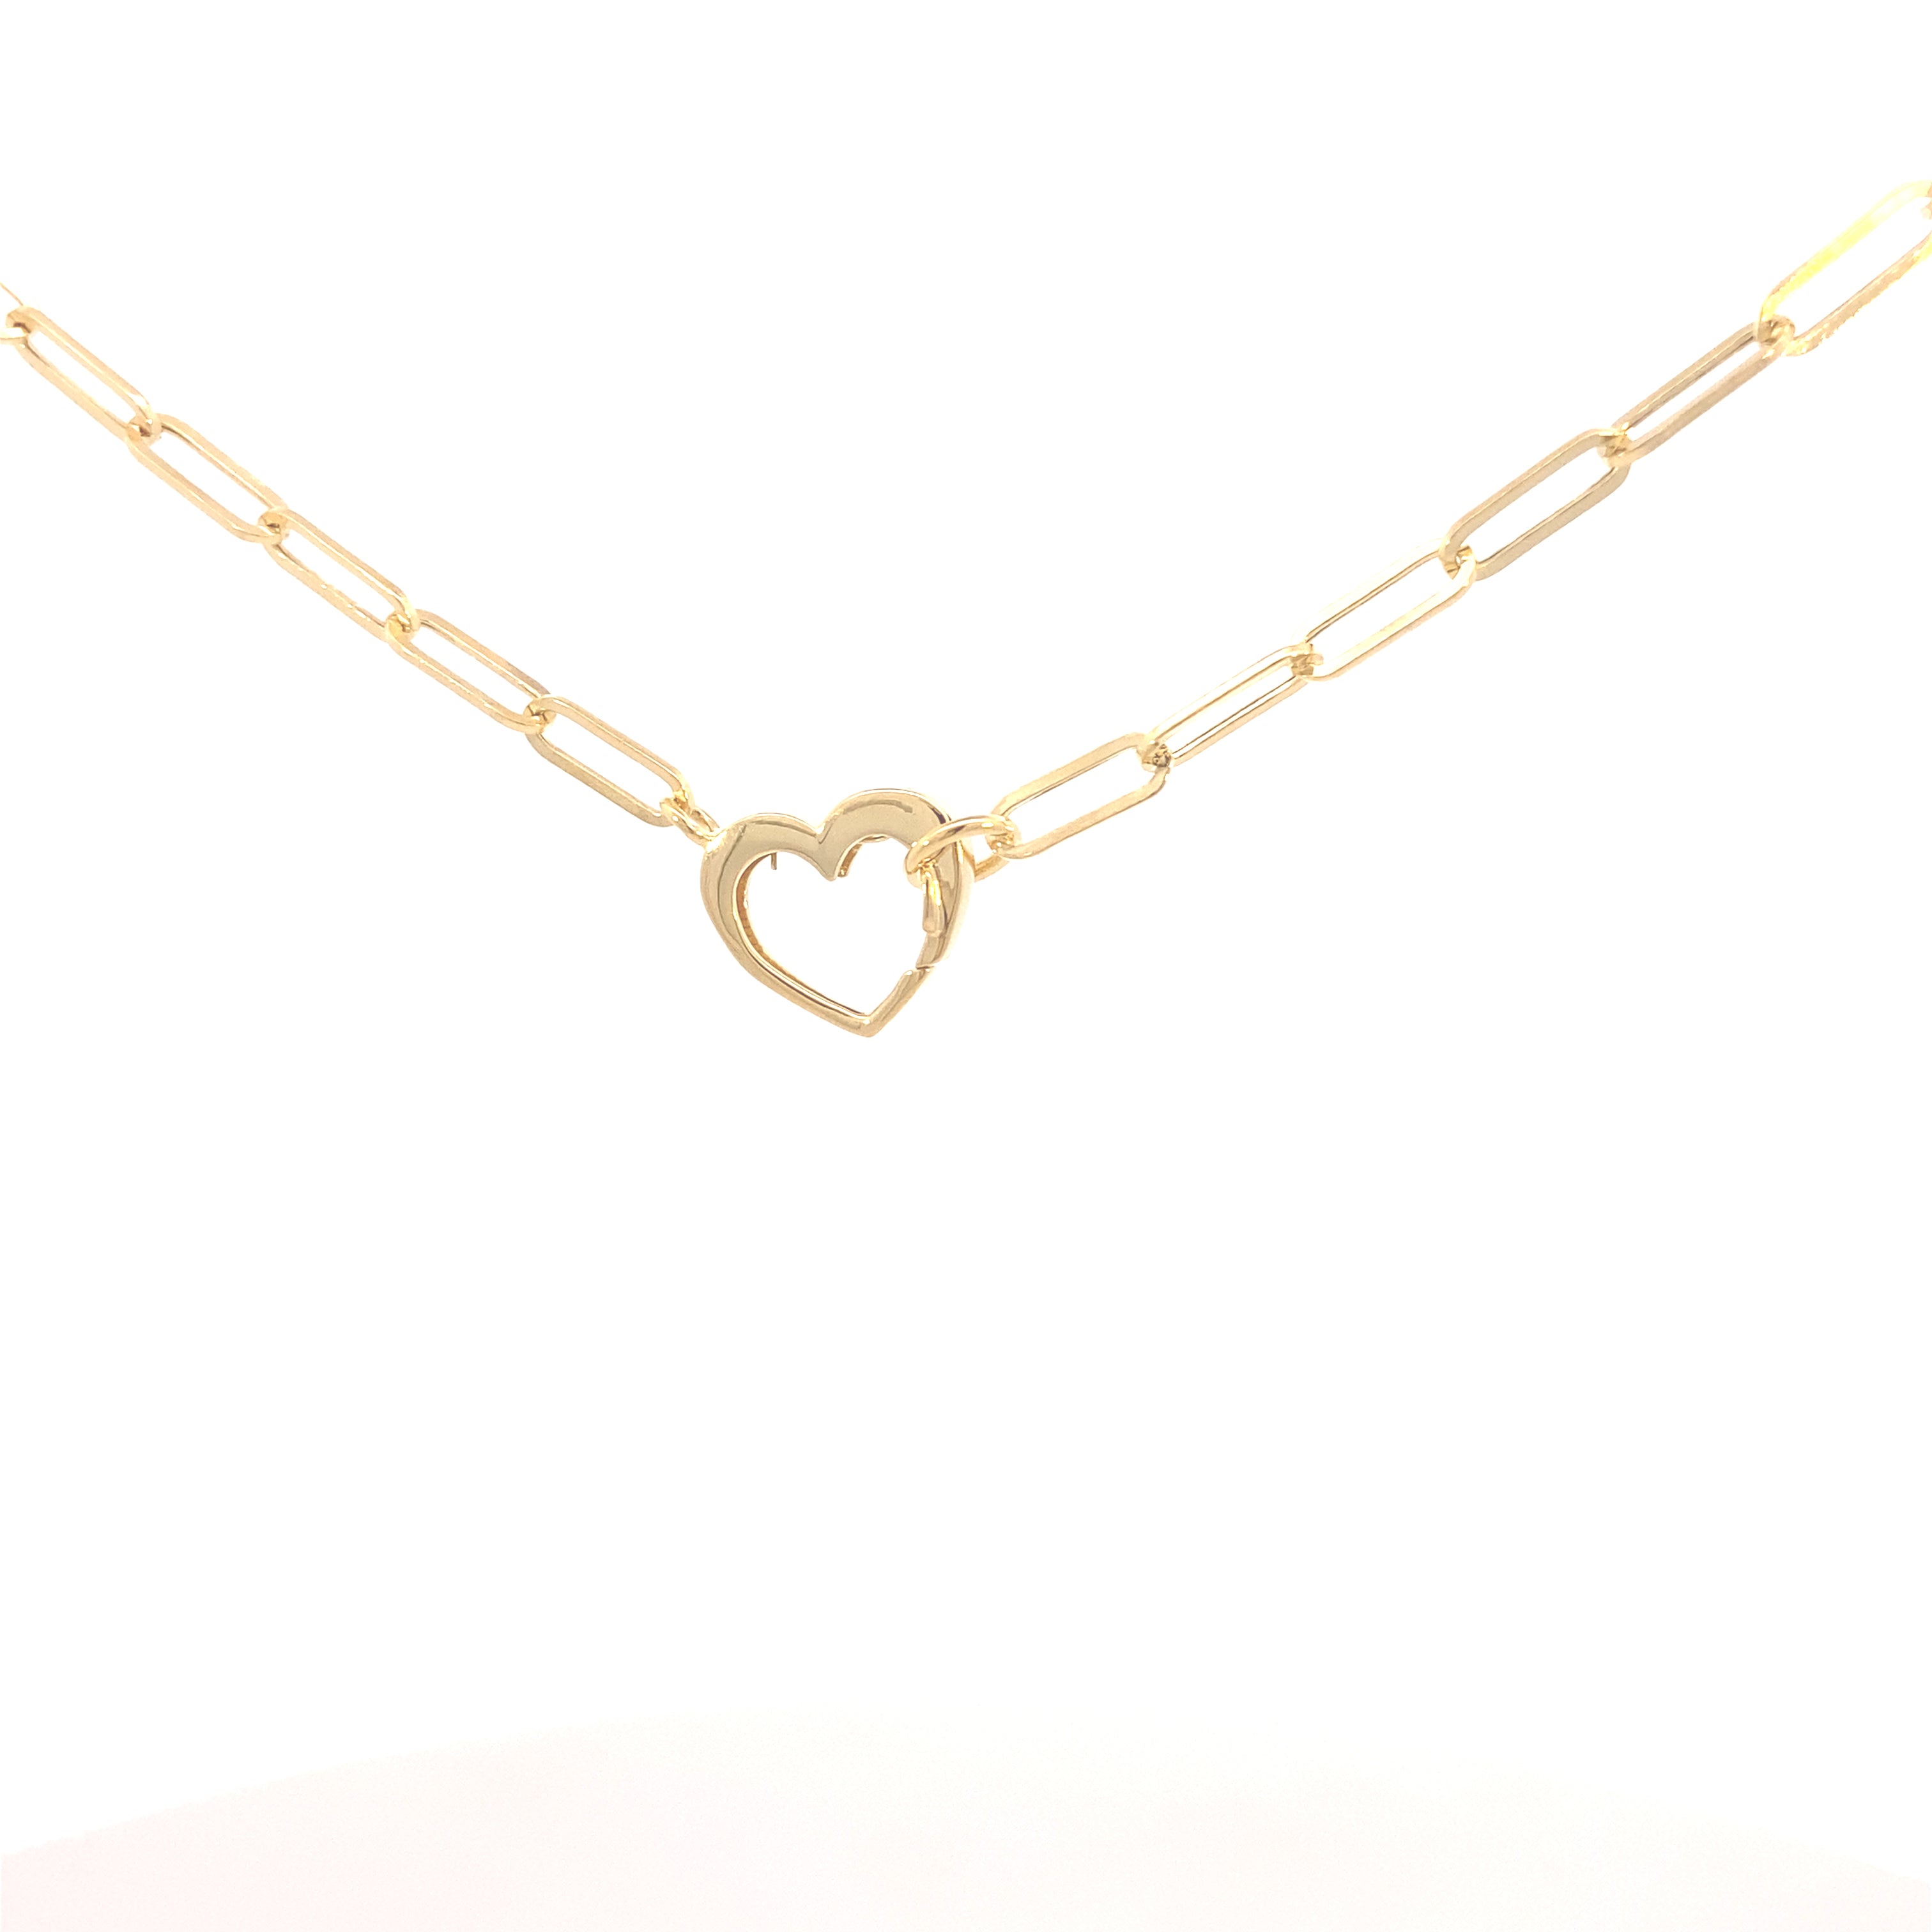 Bloomingdale's Diamond Accent Paperclip Necklace In 14k White & Yellow Gold,  0.05 ct. t.w. - 100% Exclusive | Bloomingdale's